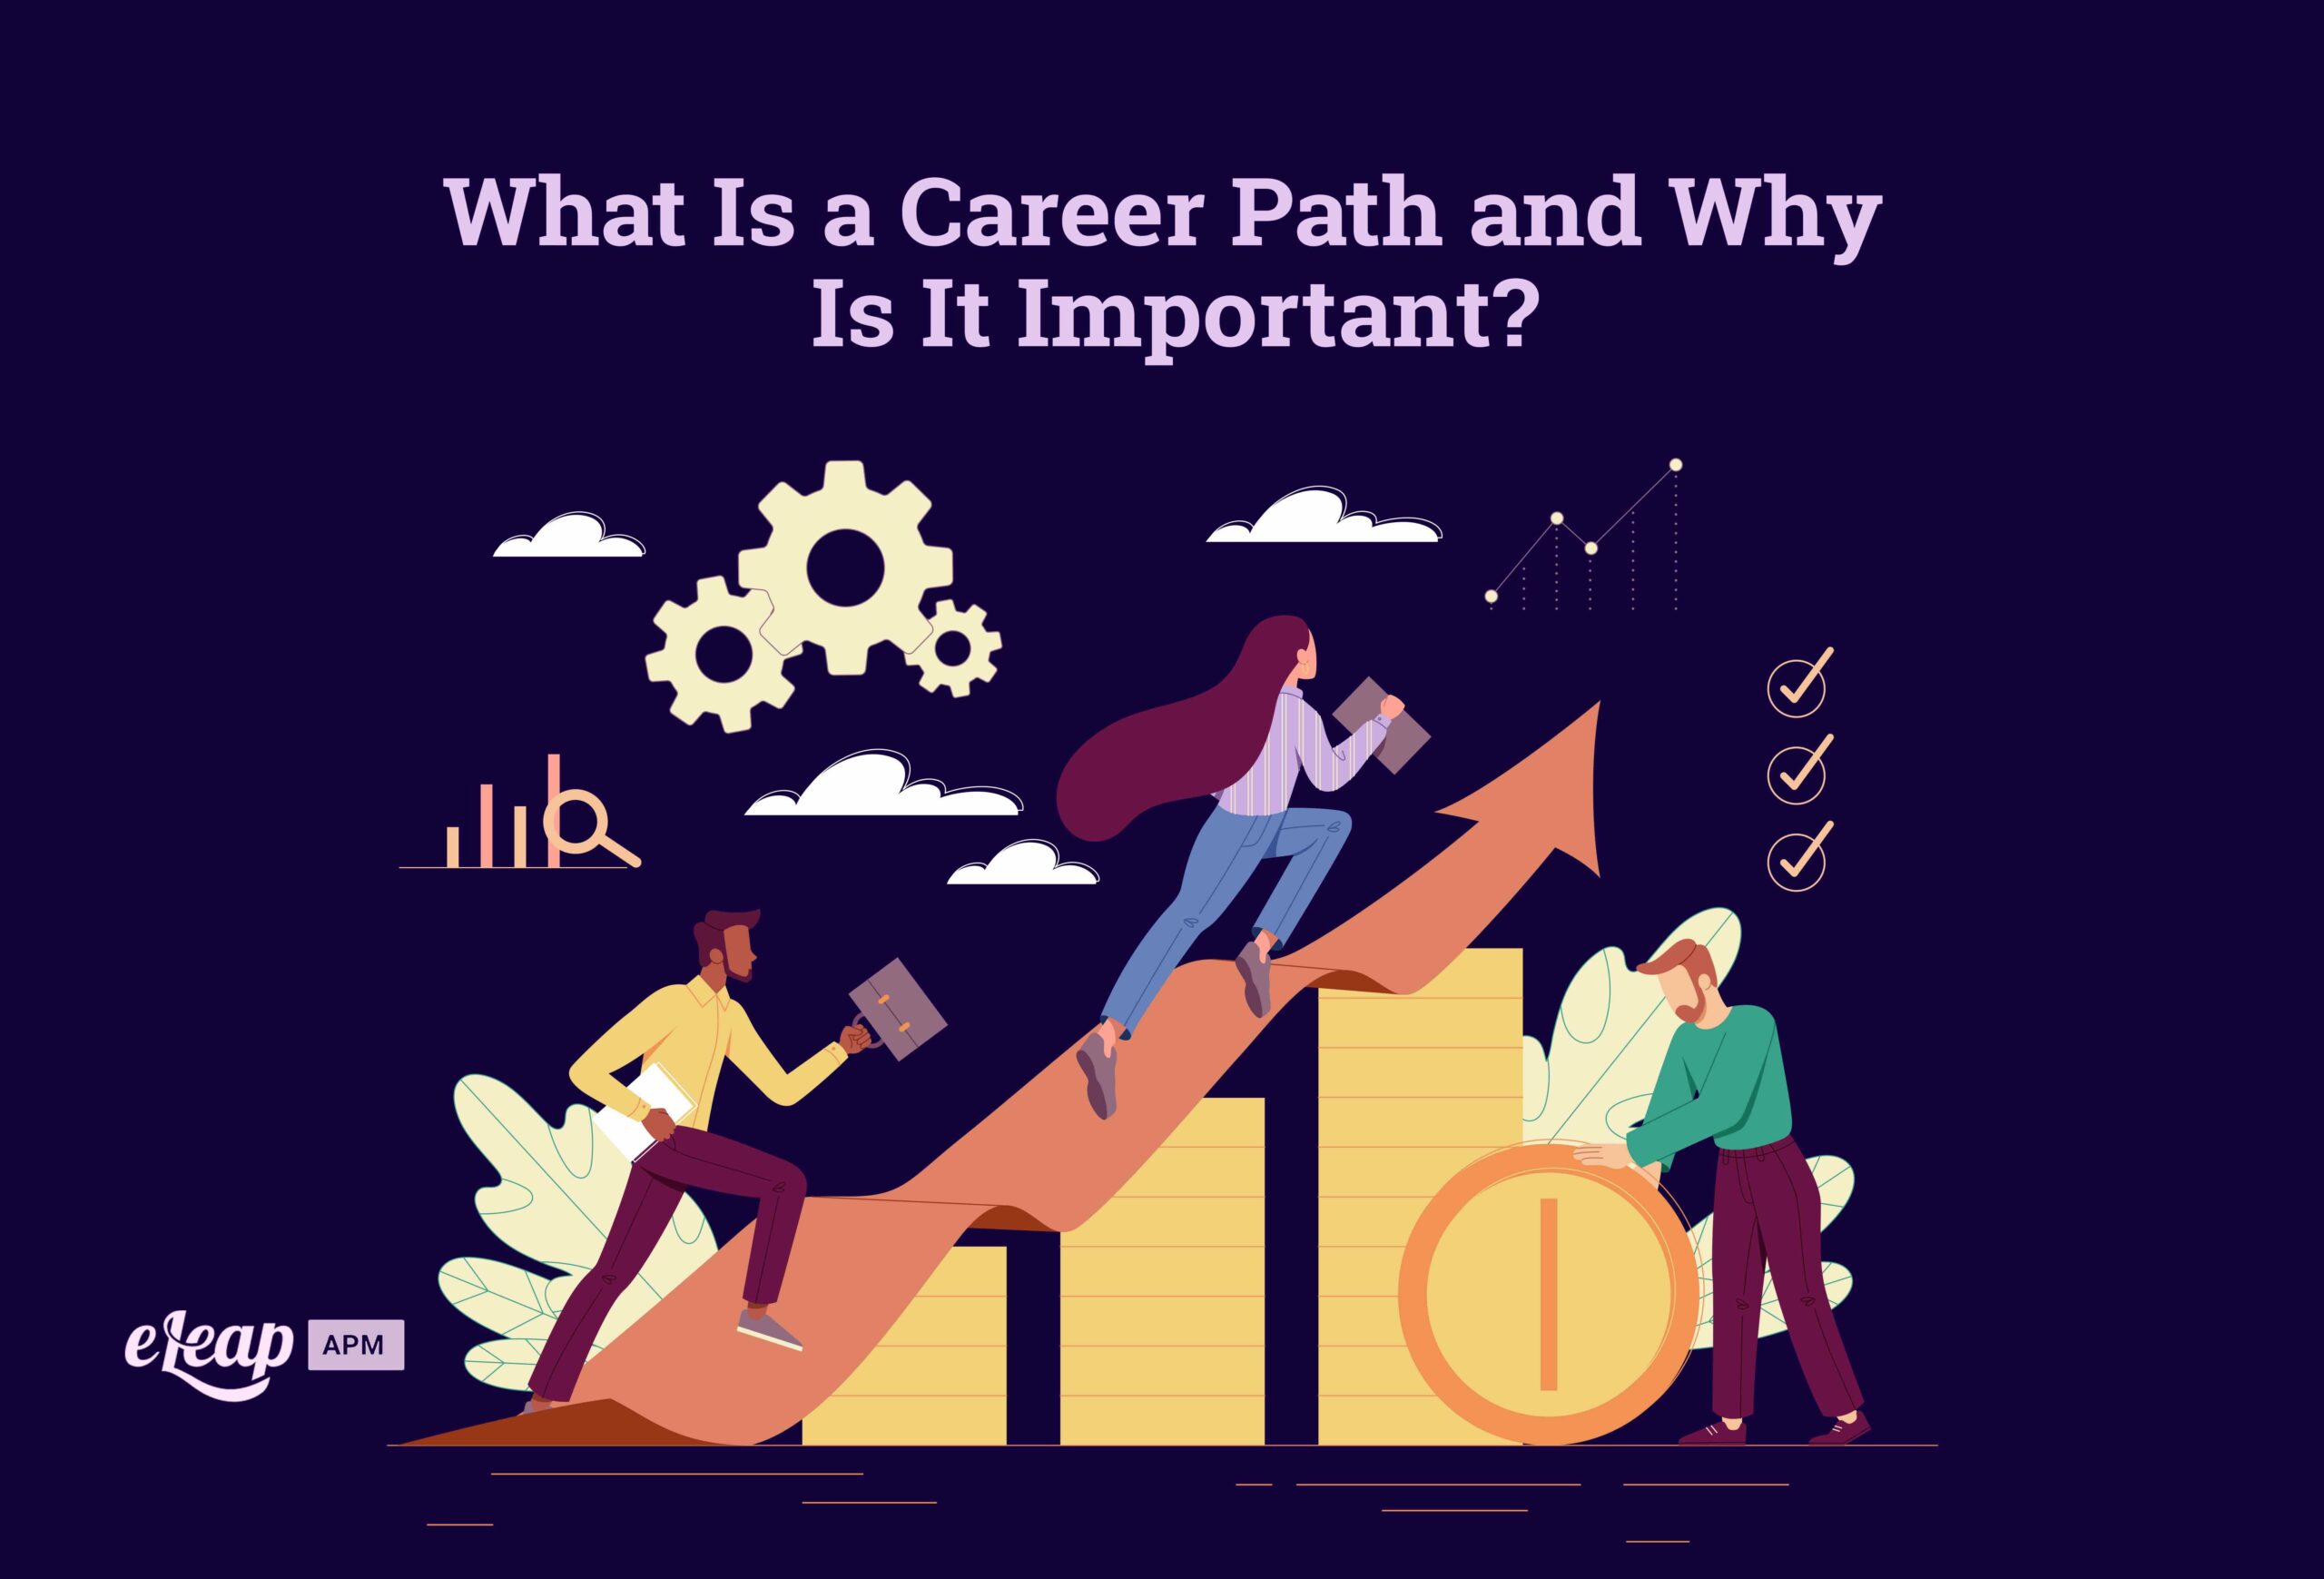 What is a Career Path and Why is it Important?